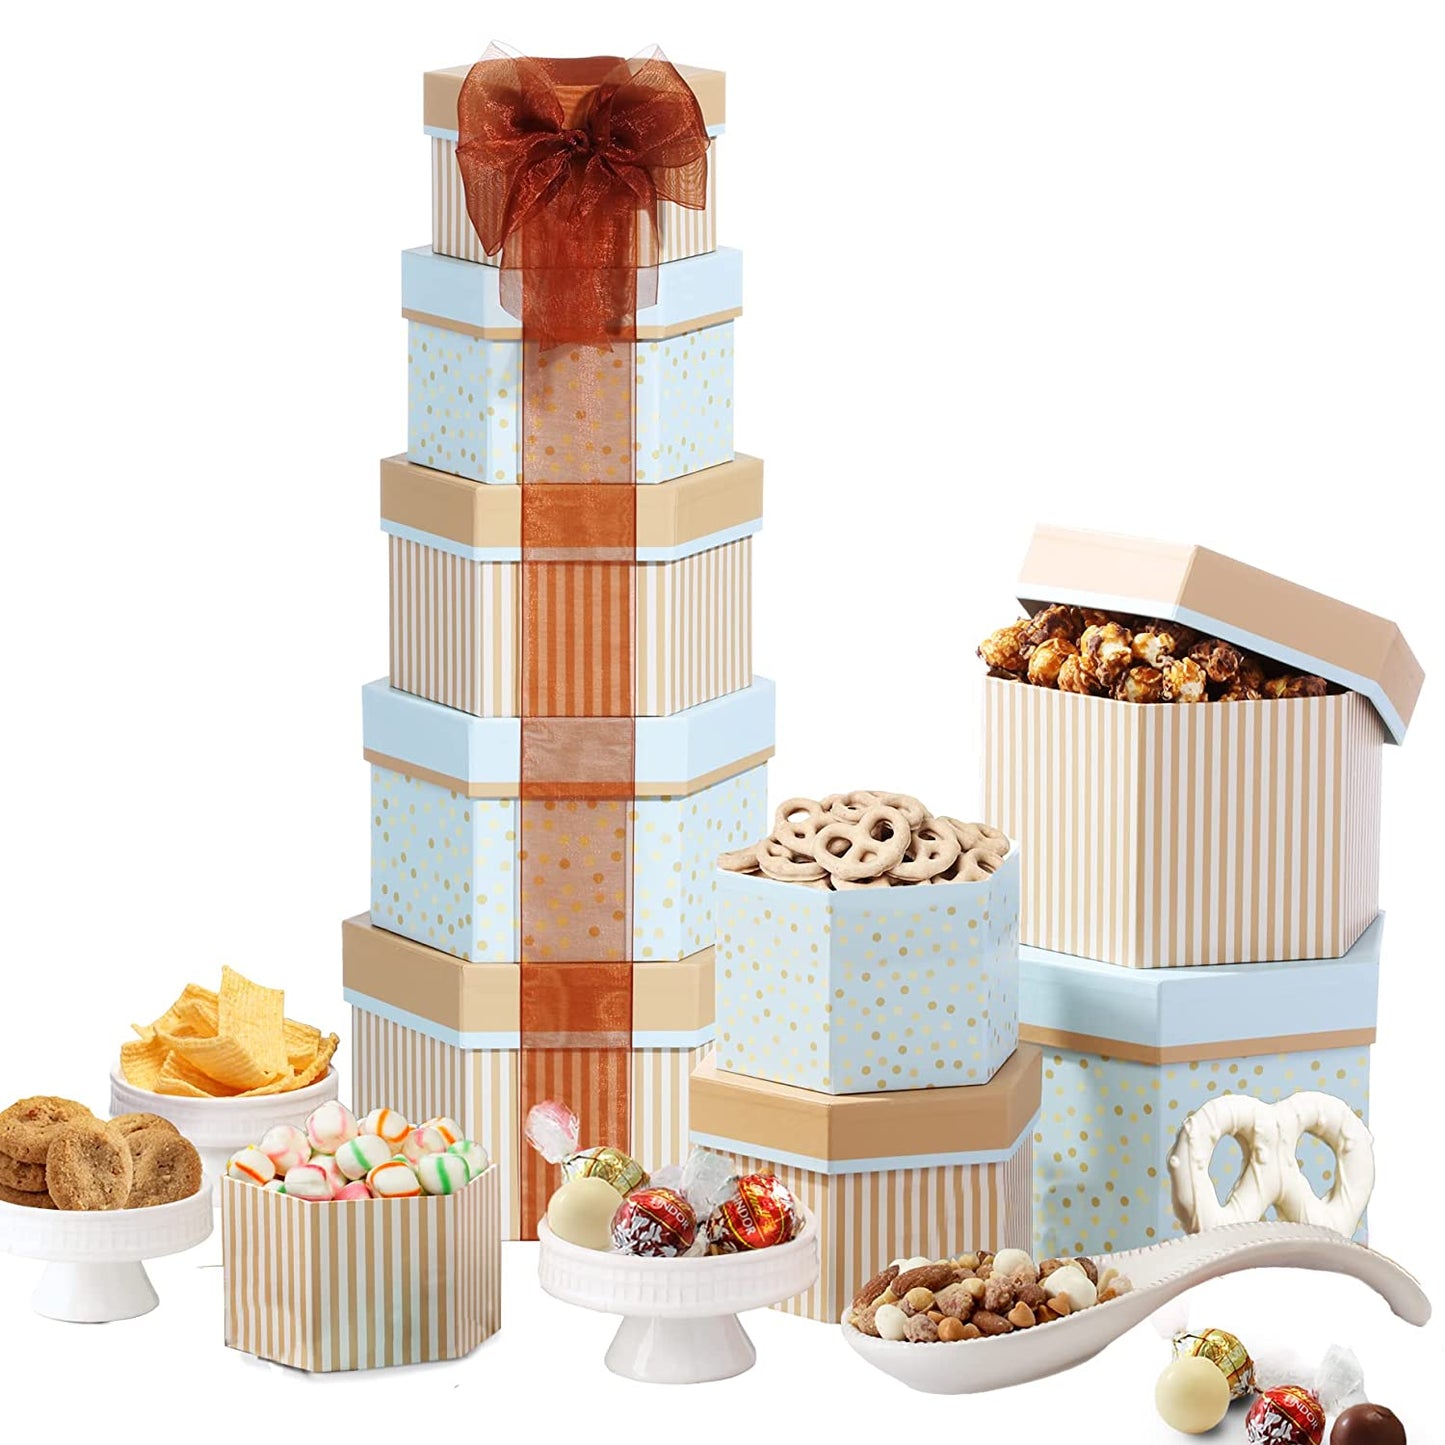 Broadway Basketeers Chocolate and Sweets Gift Tower for Birthday, Thank you, Get Well, Valentines Day, Him or Her